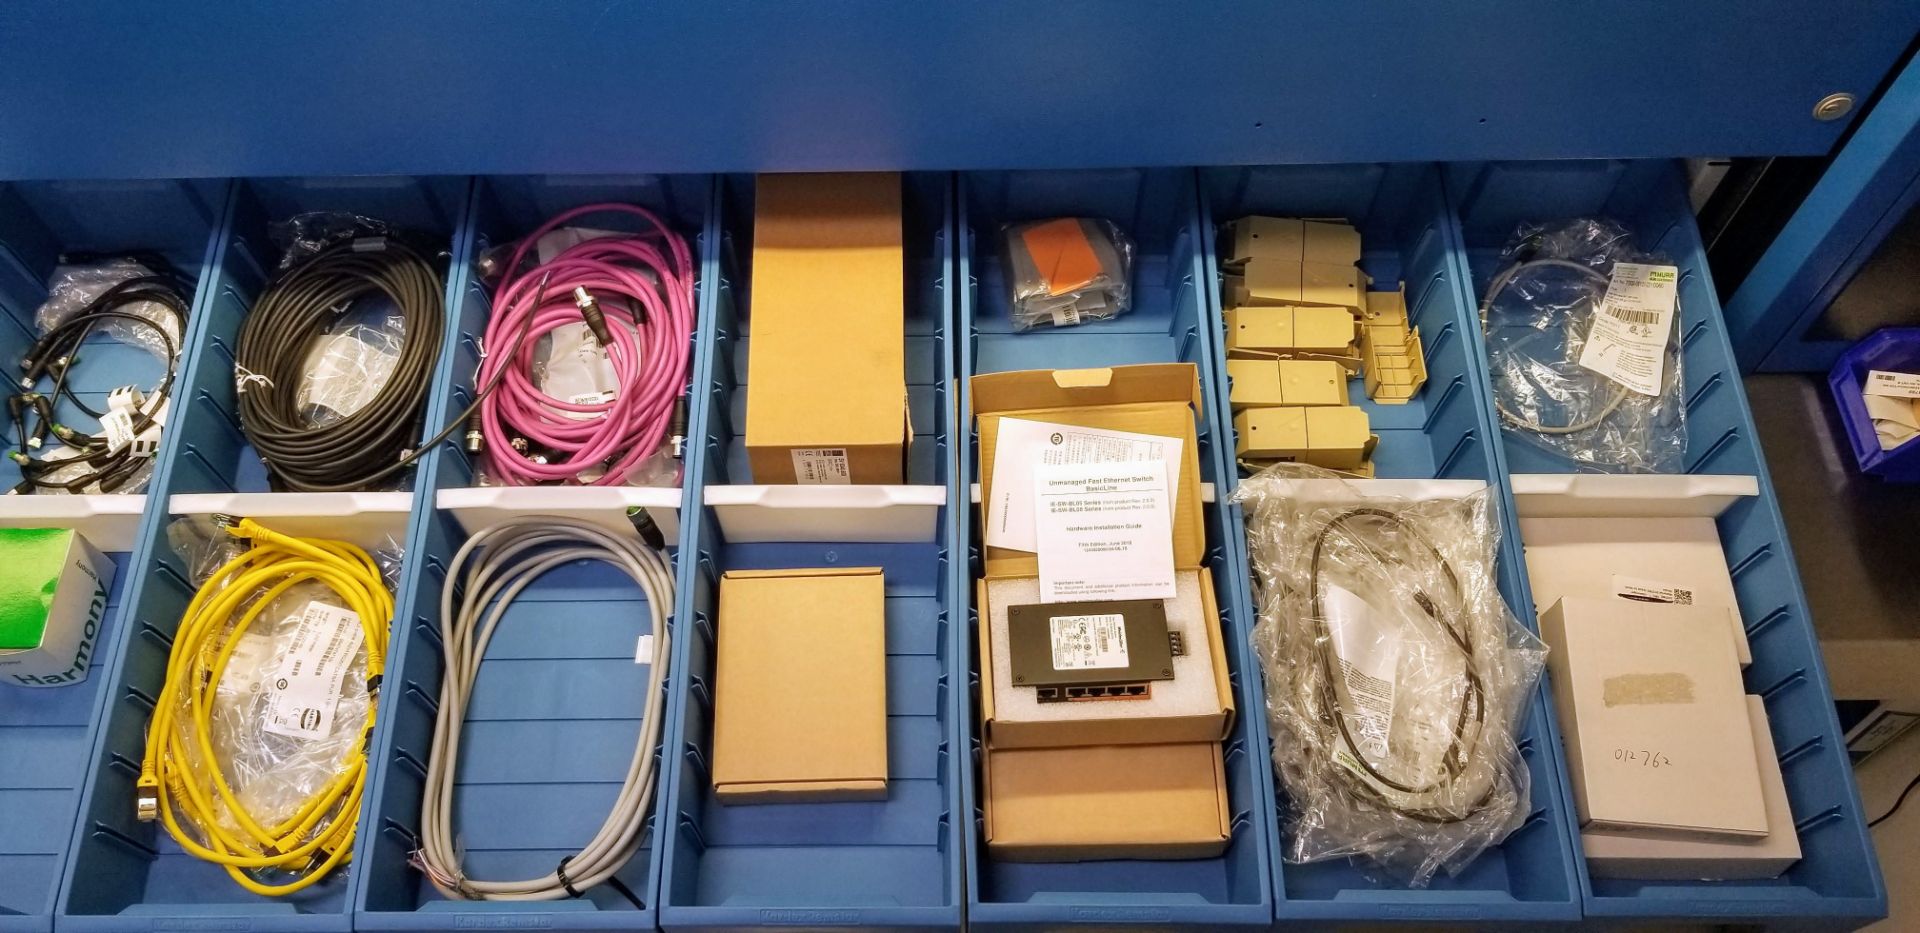 LOT - CONTENTS OF 36 SHELVES INCLUDING: MOTOR CABLES, HYBRID CABLES, PLUGS, INPUT CARDS, MODULES, - Image 65 of 100